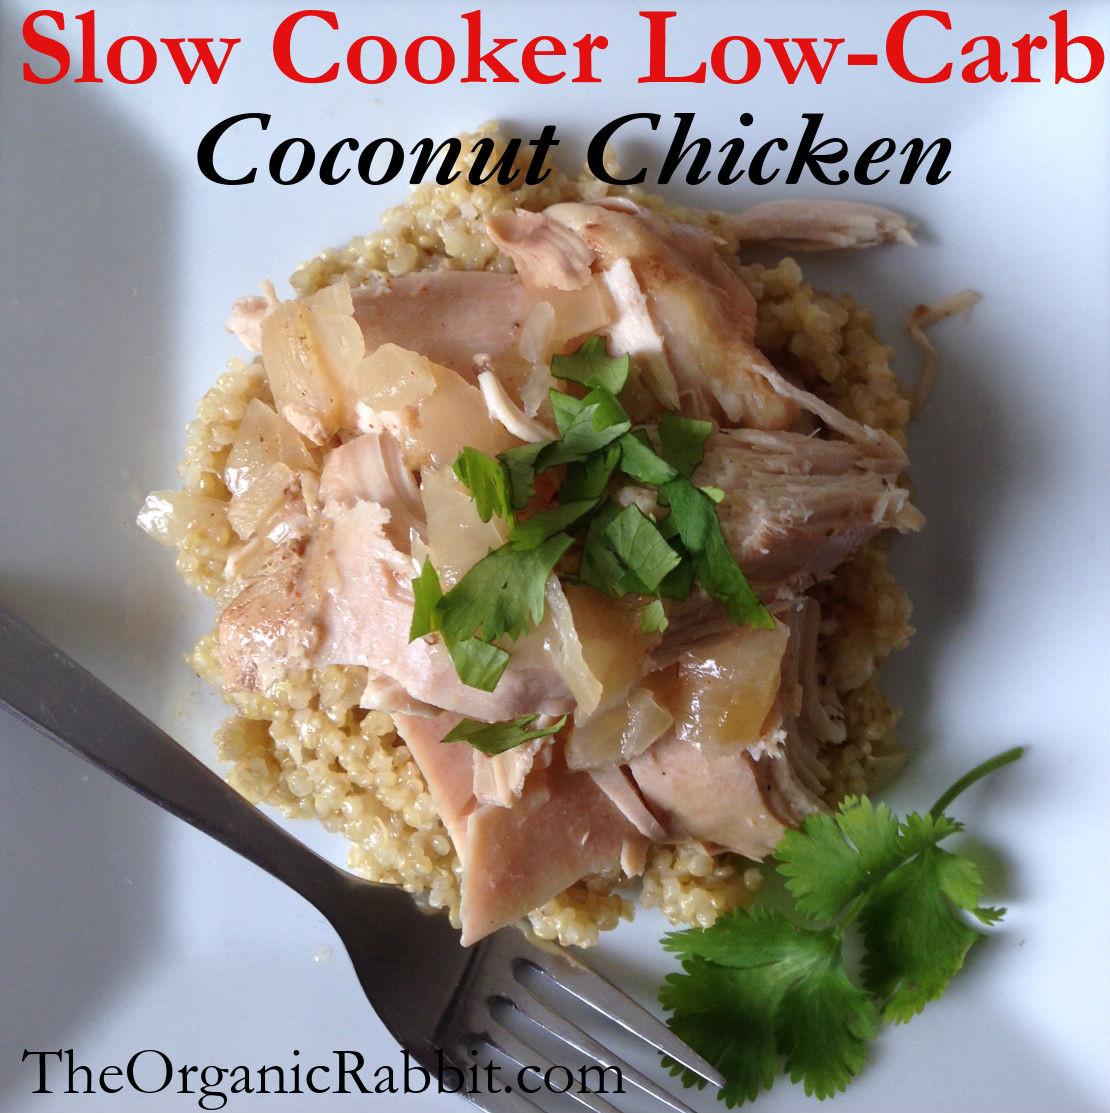 Low Carb Slow Cooker Chicken Recipes
 paleo low carb protein coconut chicken slow cooker weight